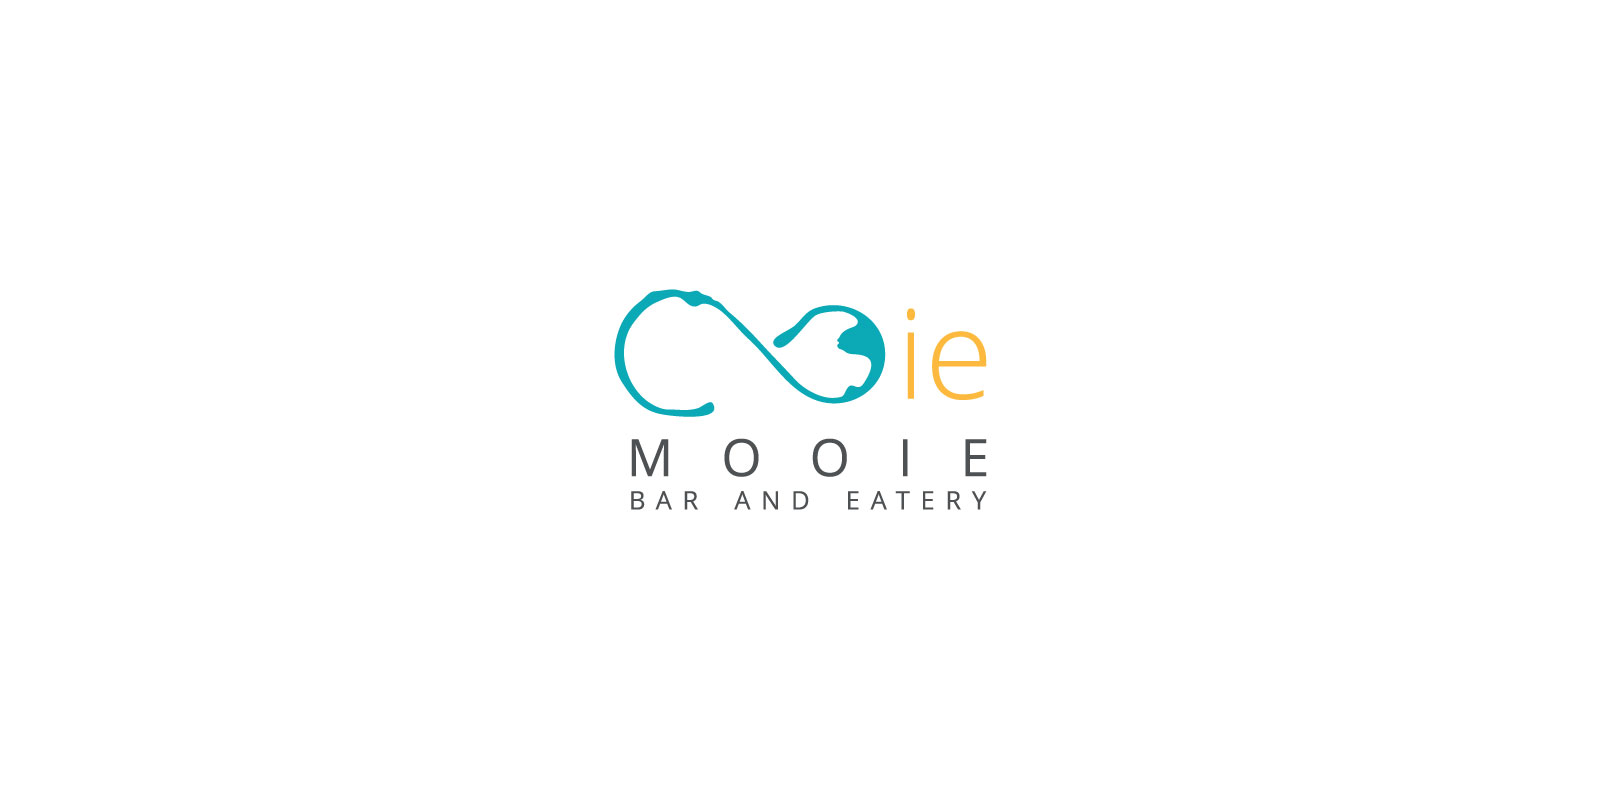 Mooie Cafe and Bar